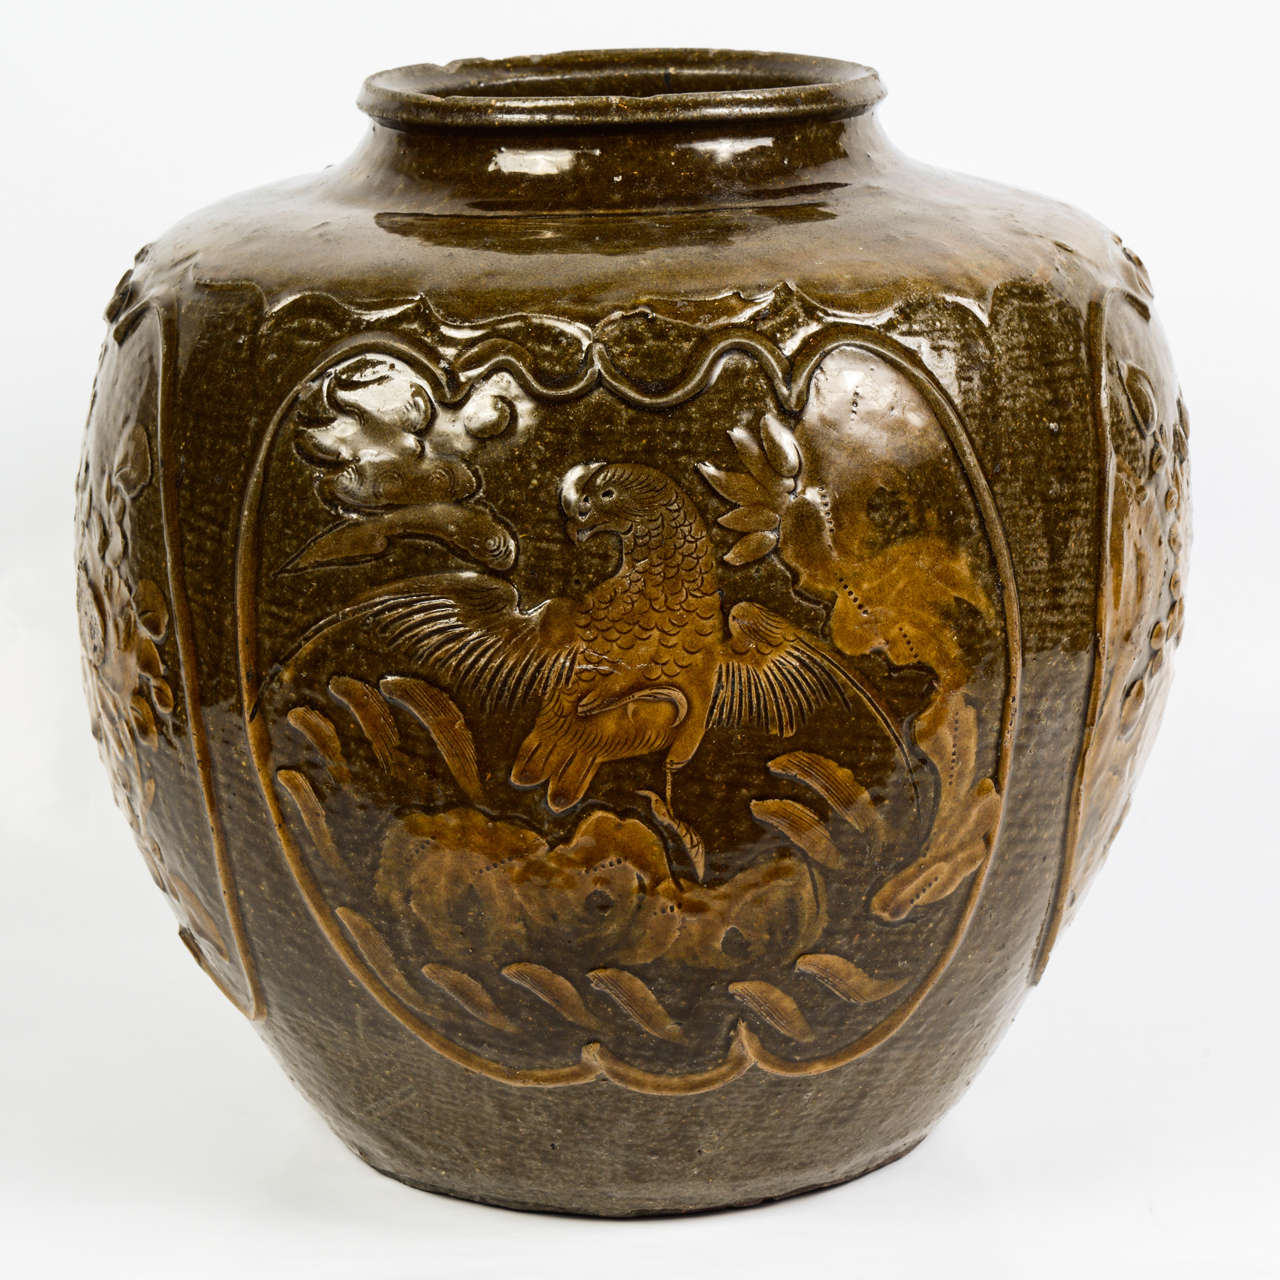 Large brown glazed stoneware urn with chrysanthemums decor on one side and a prancing horse on the other side.
This type of urn is named after Martaban, harbour on the west coast of modern Burma, which was an important trade link between China and